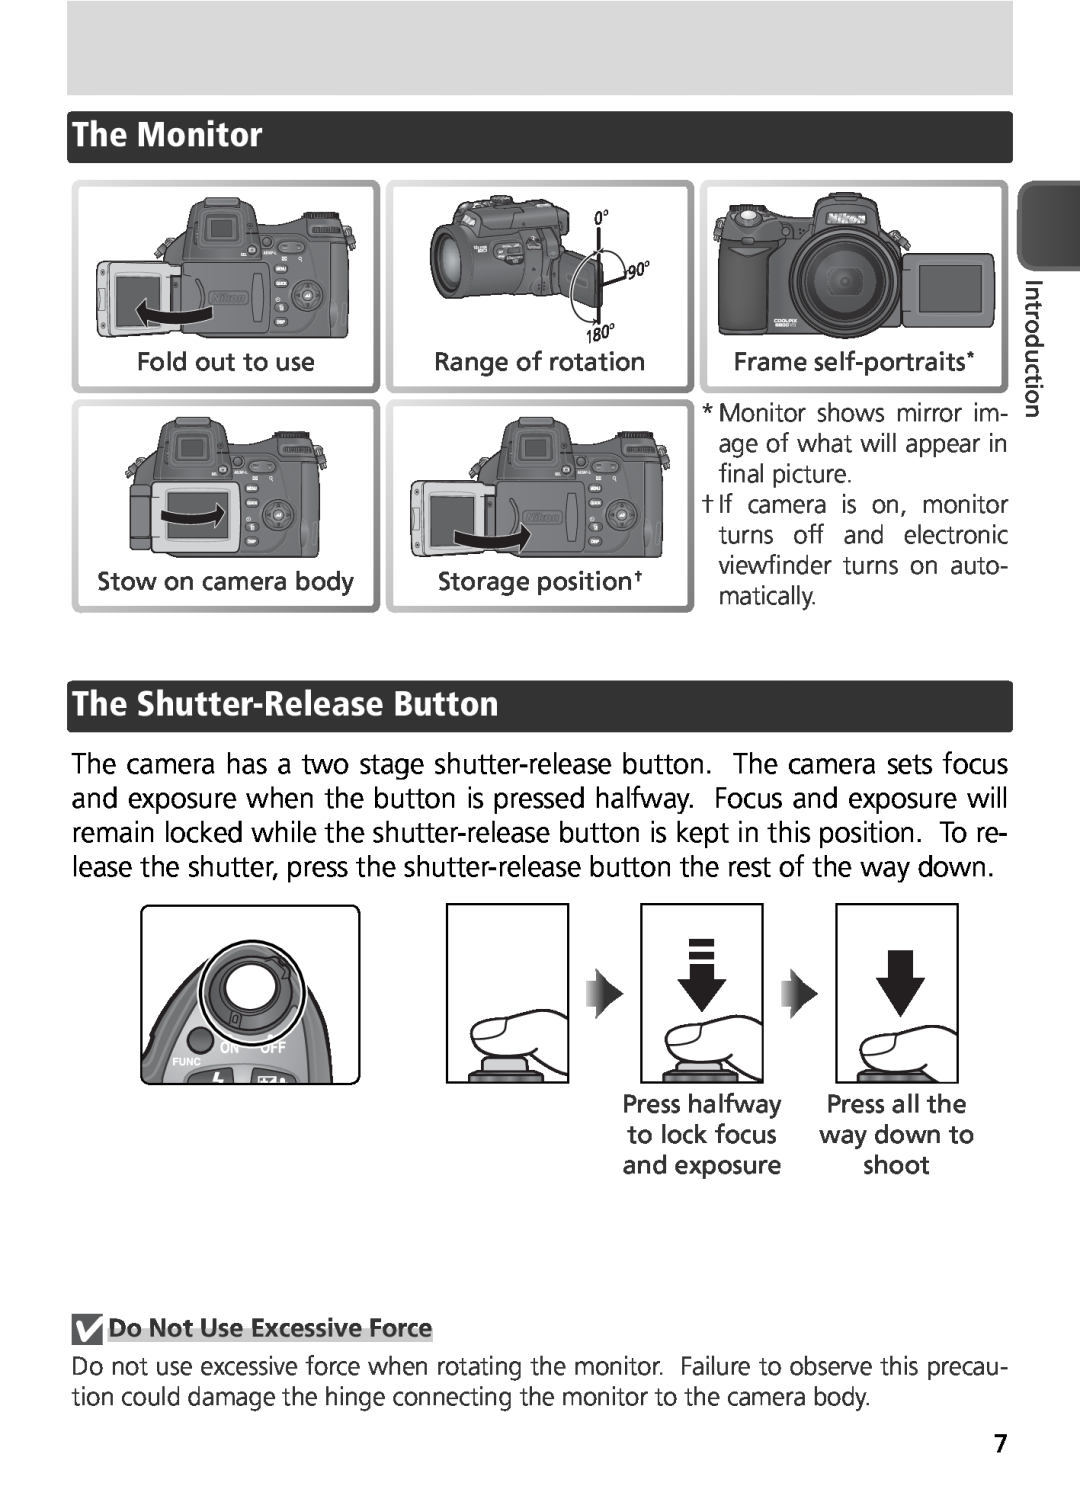 Nikon COOLPIX8800 manual The Monitor, The Shutter-Release Button, Do Not Use Excessive Force 